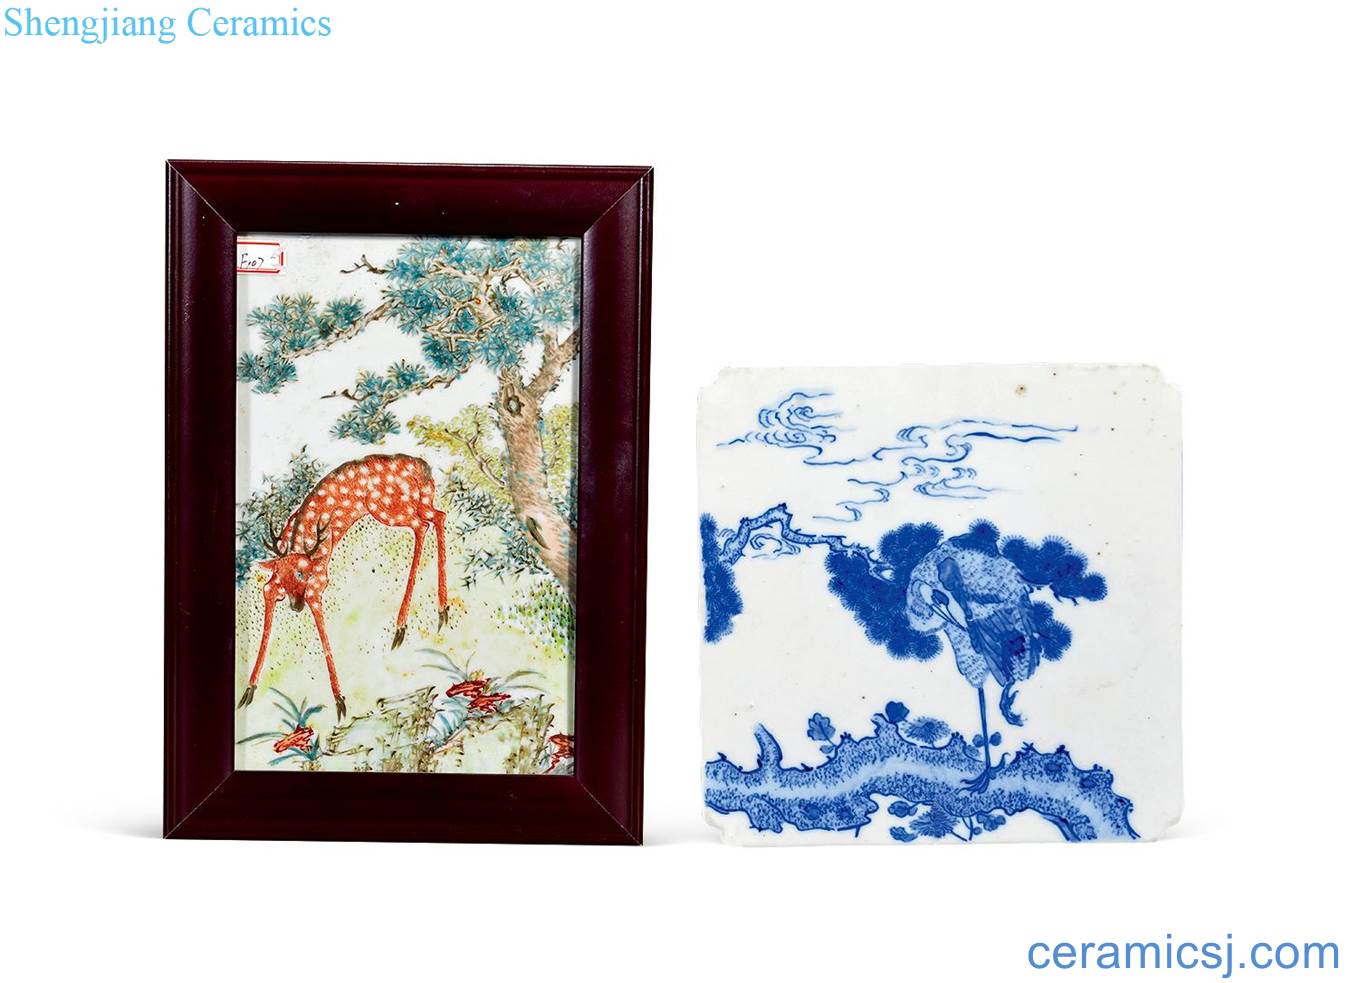 Clear pastel deer grain porcelain plate, blue and white cranes come loose grain porcelain plate (or two)